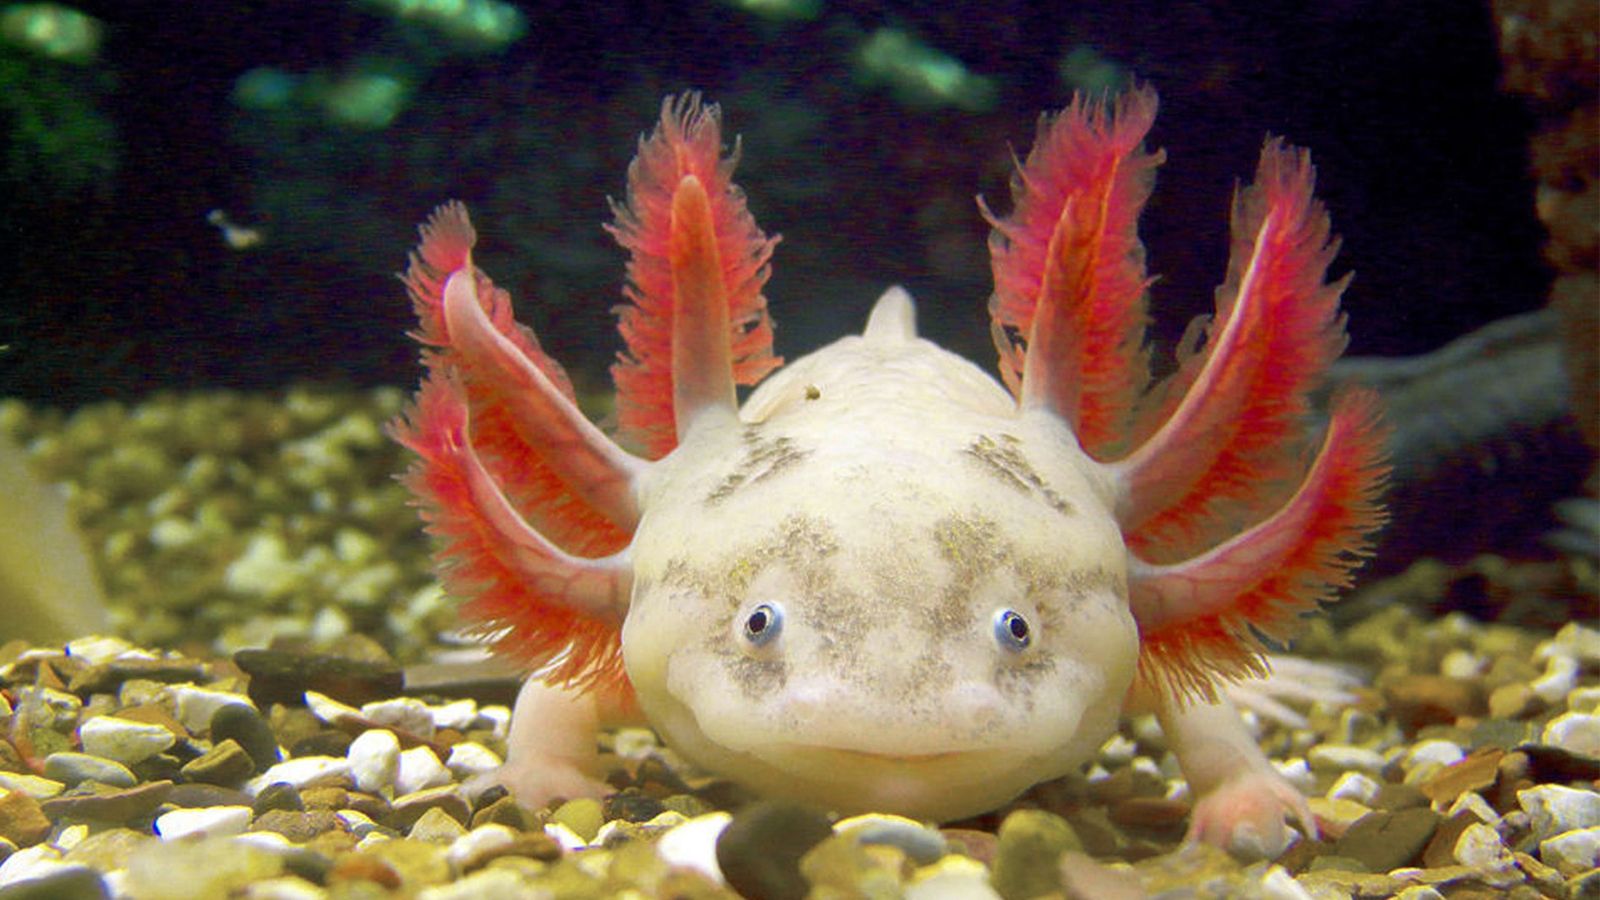 The Super Cute Axolotl Is Also A Ruthless Carnivore